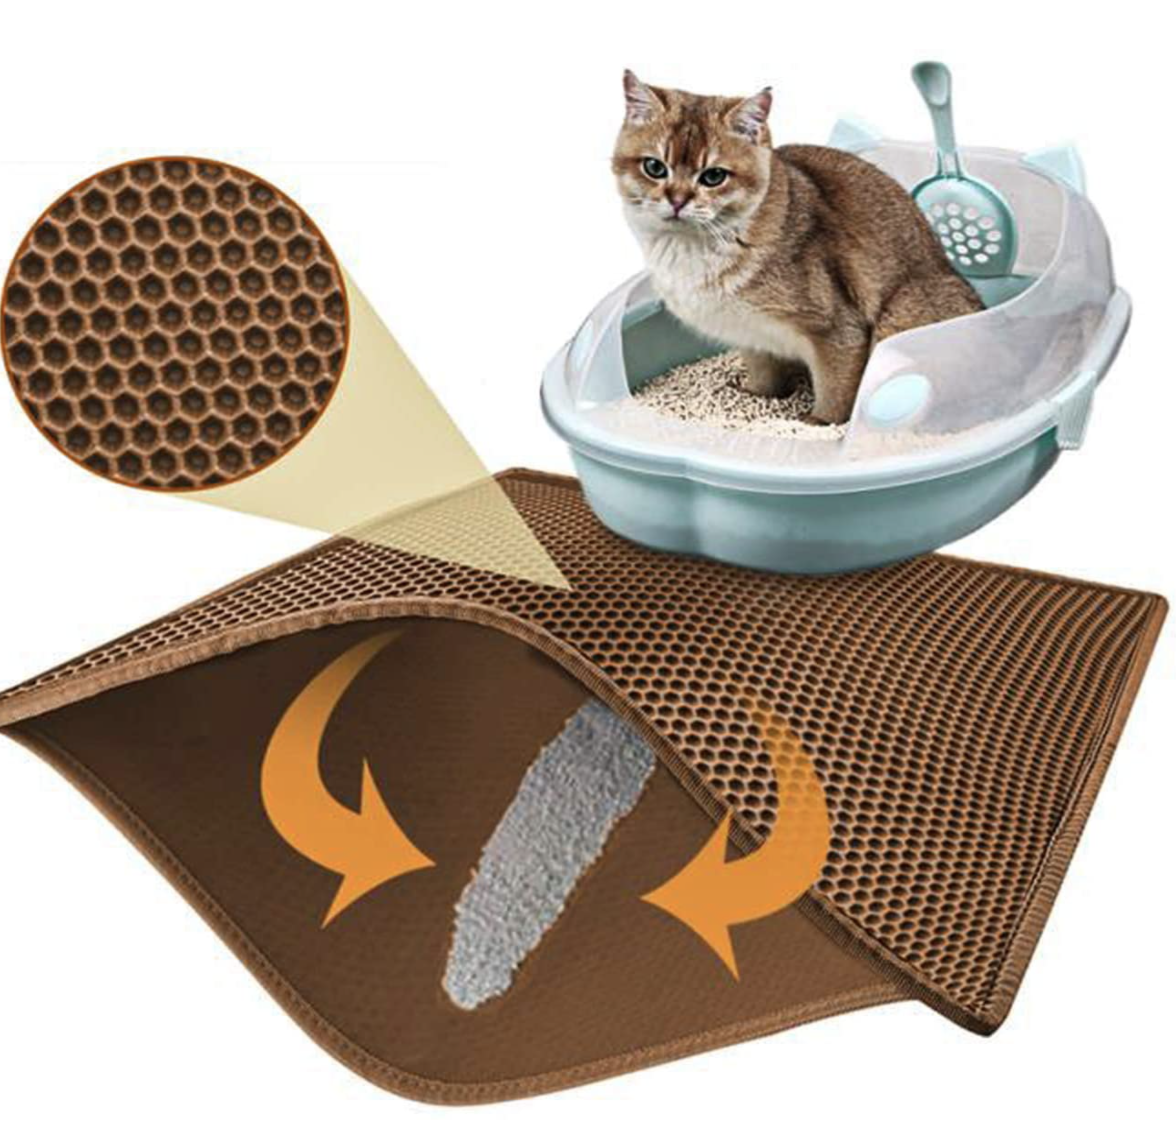 A cat standing in a litter box on the mat, with arrows indicating where the litter goes